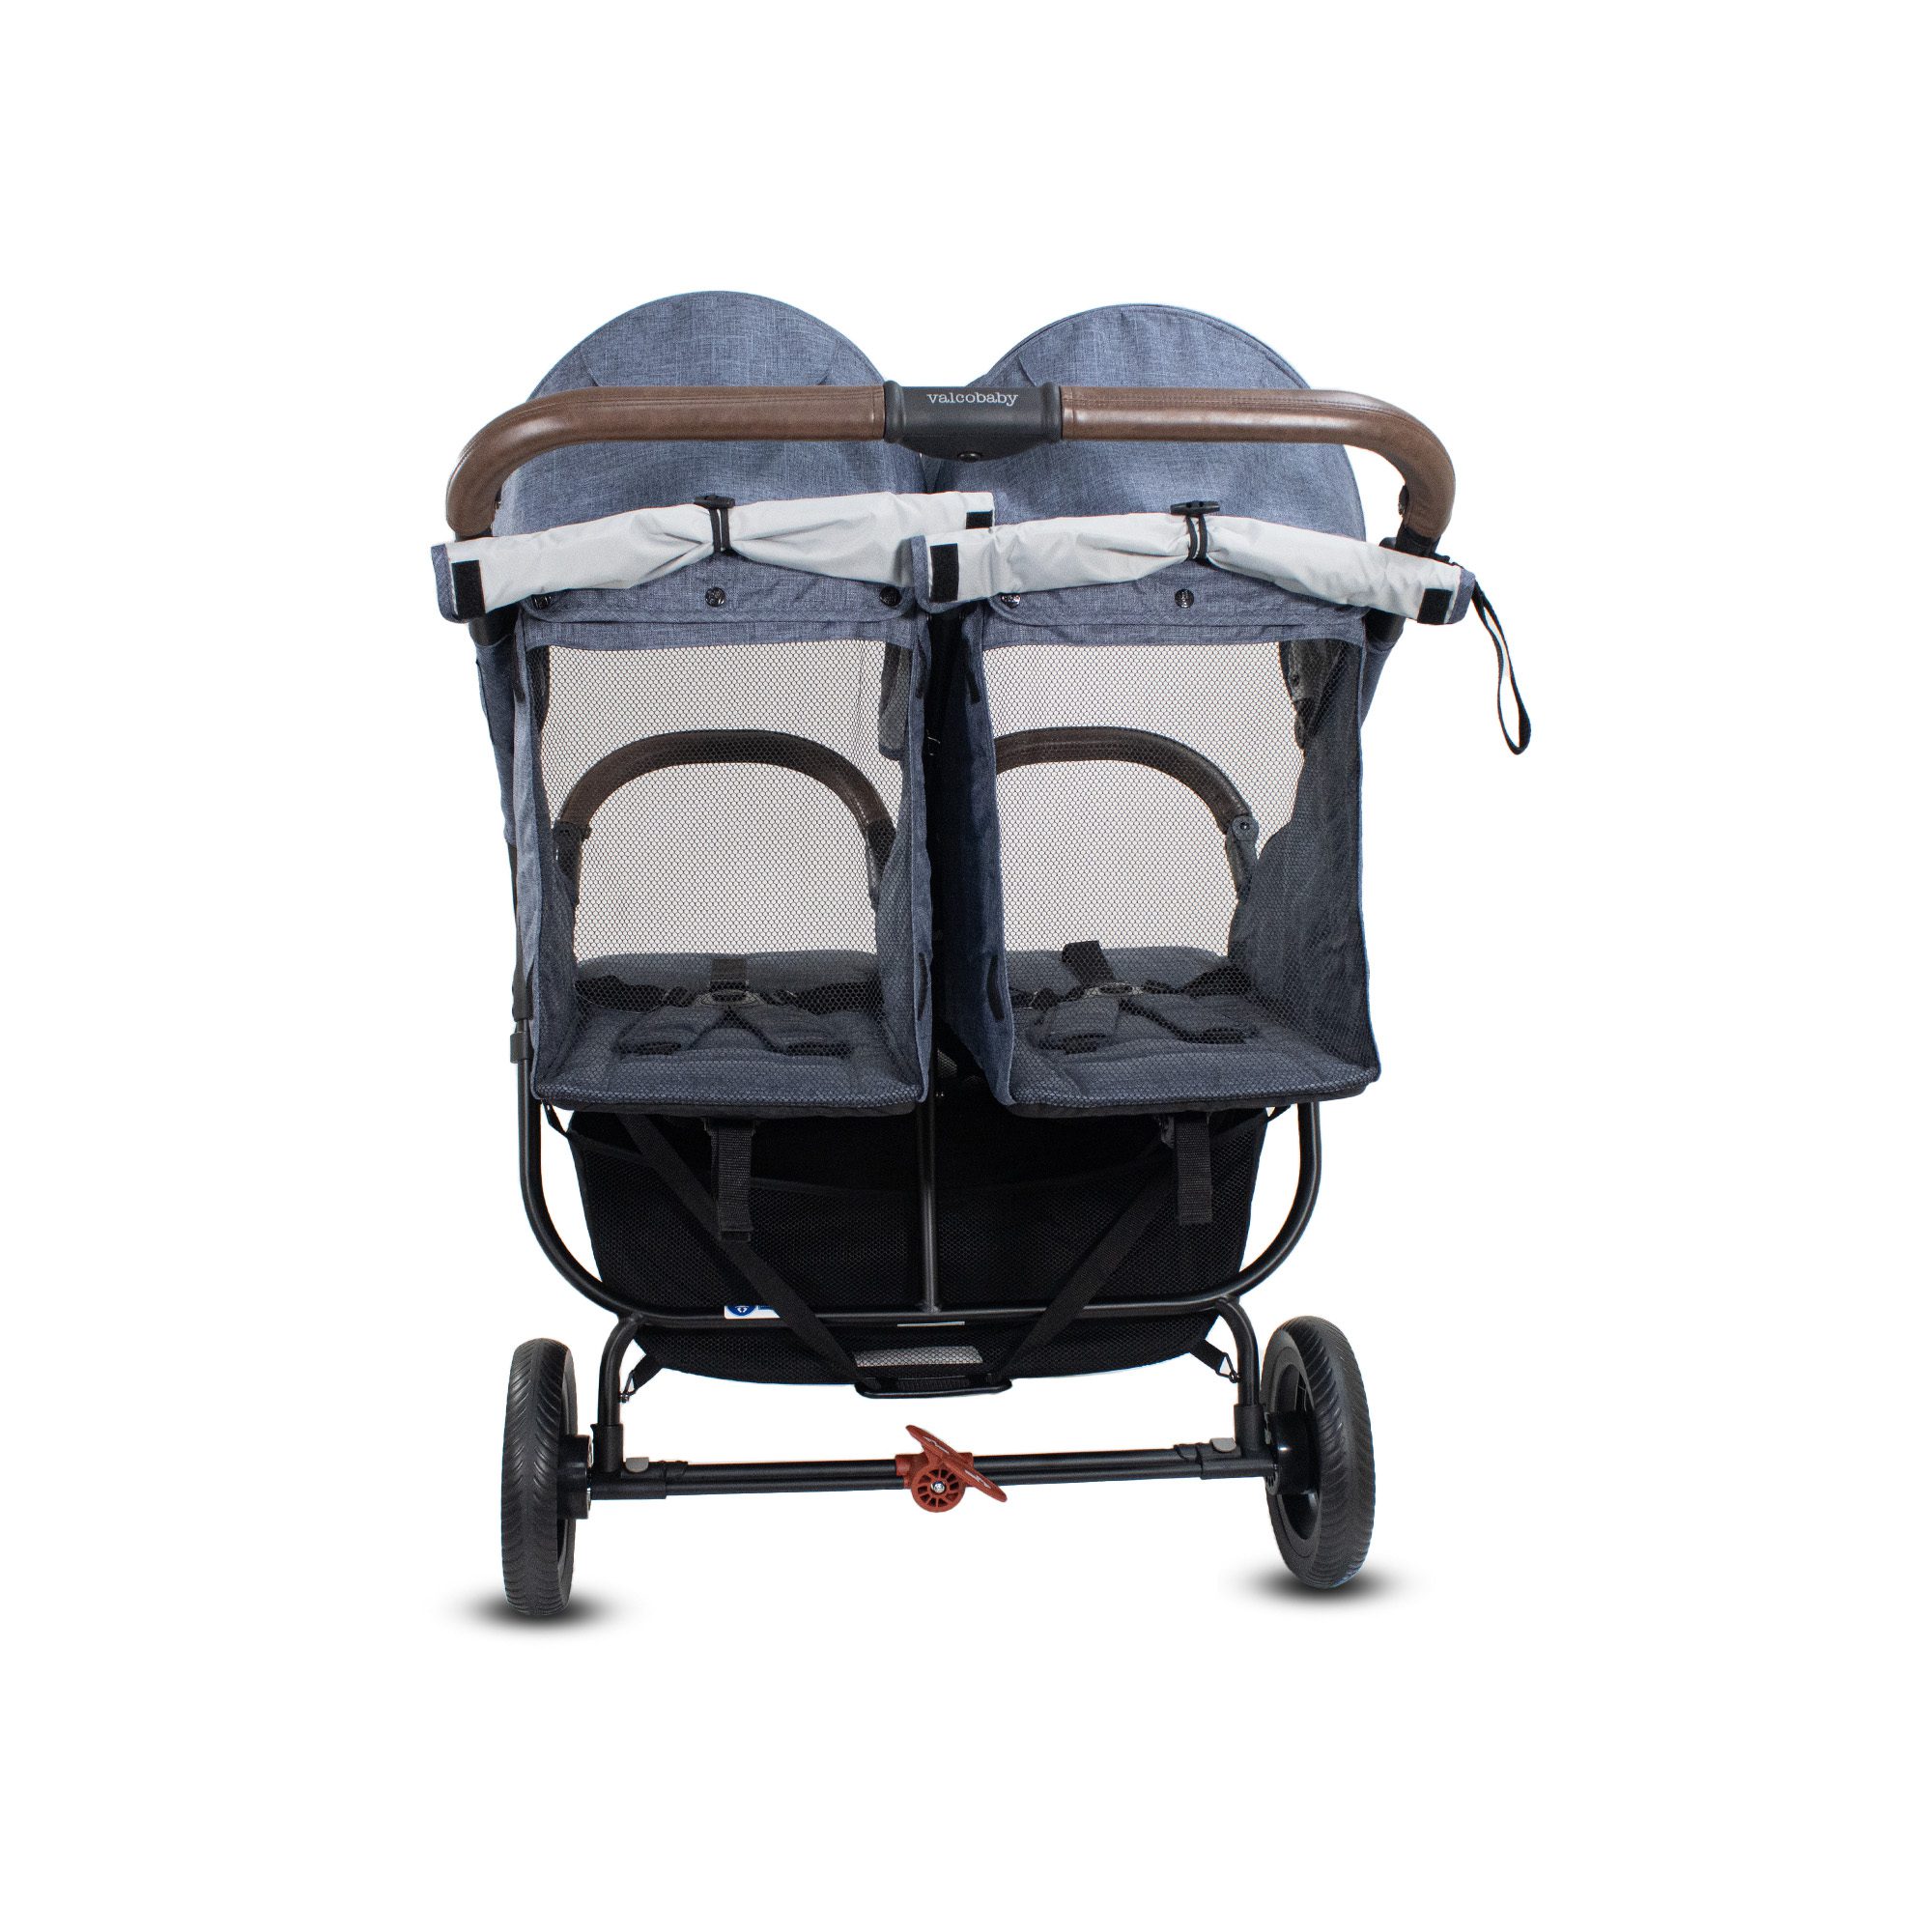 Twin Double Buggy Baby Pushchair Pram With Changing Bag Rain Cover And More! 